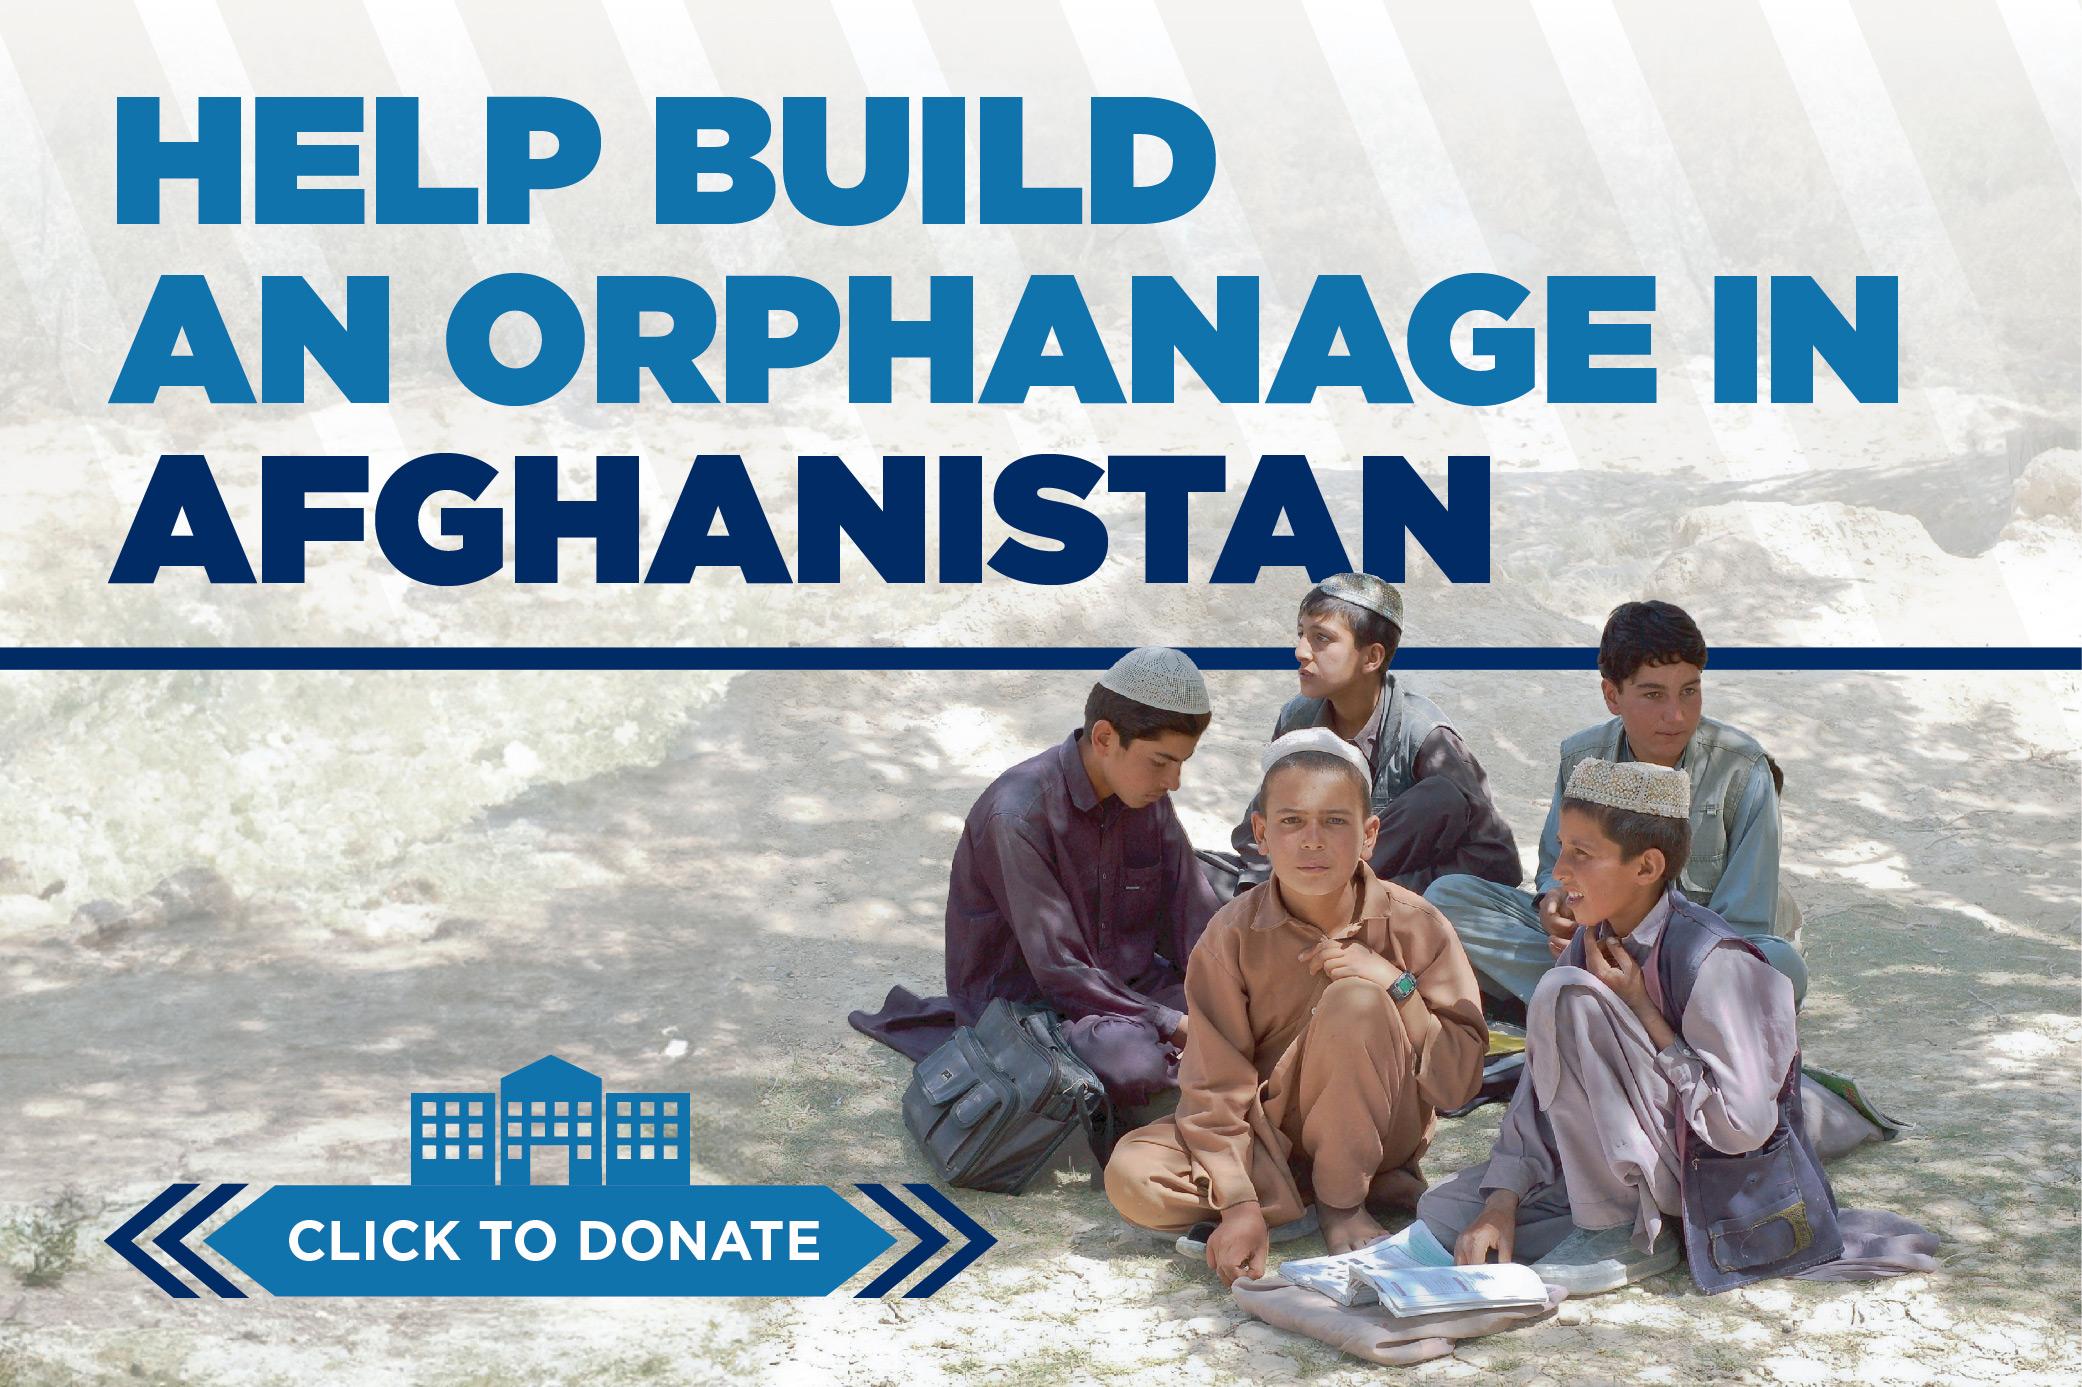 Help Build an Orphanage in Afghanistan